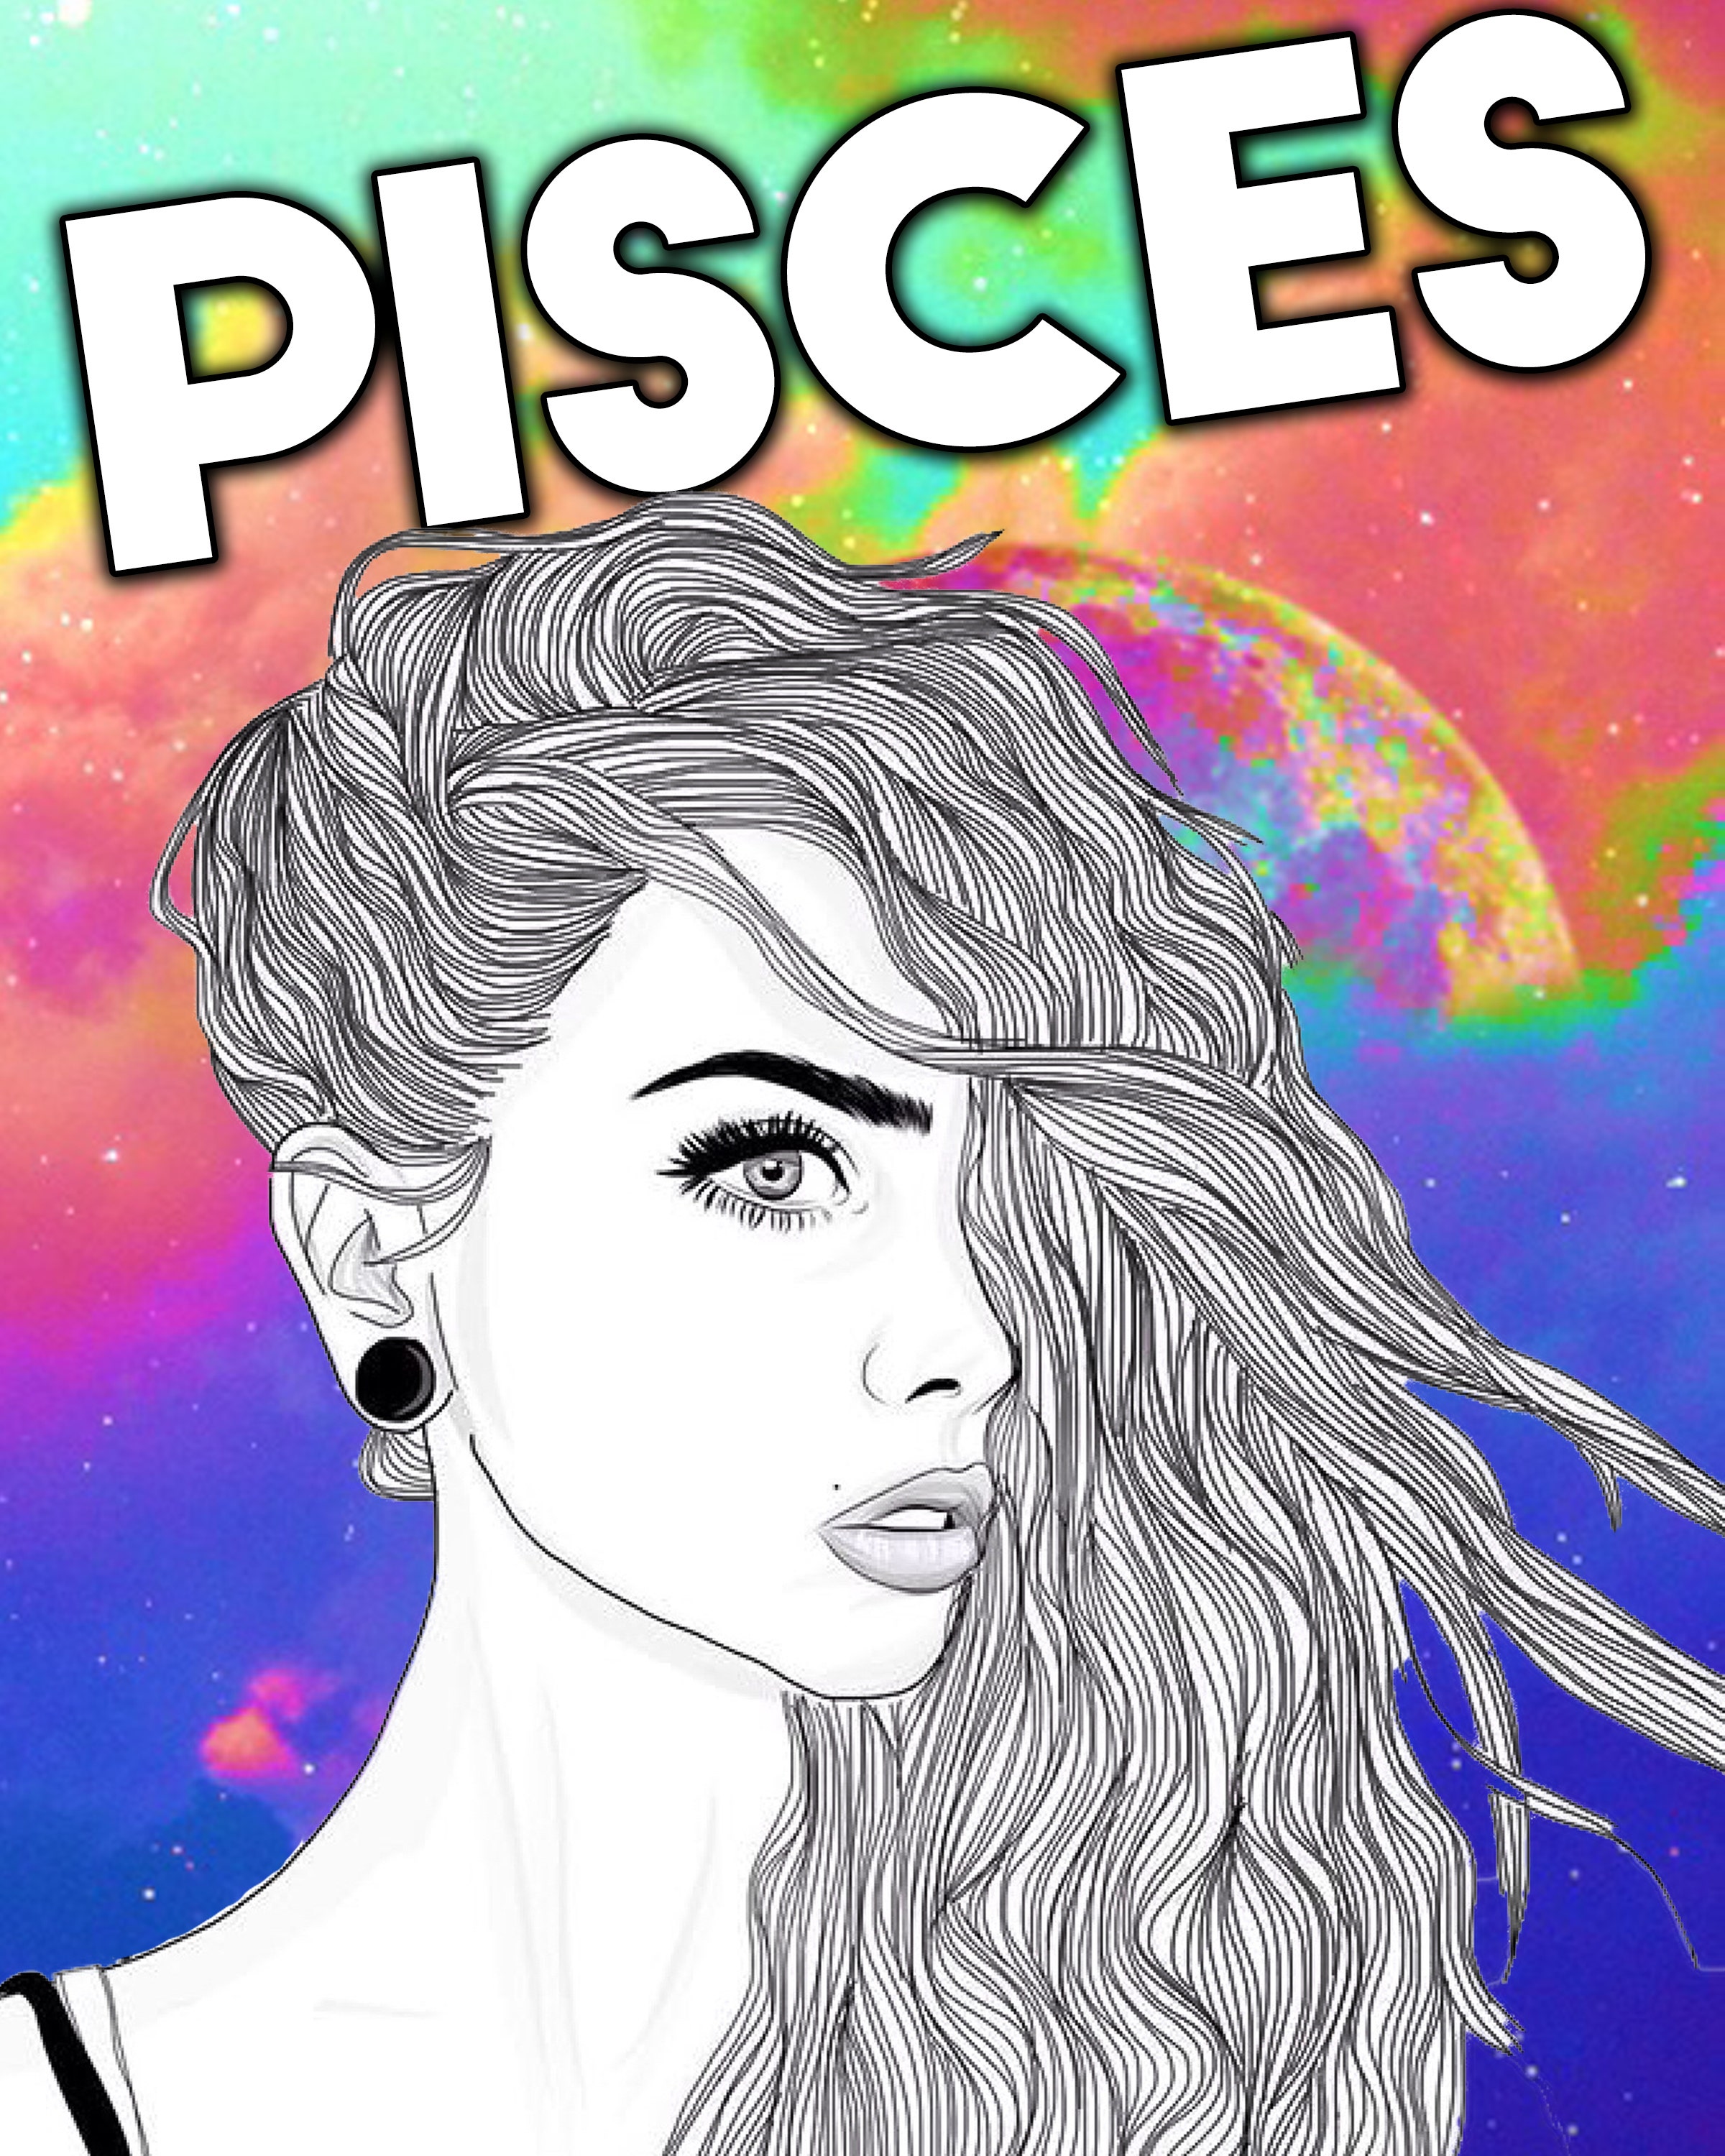 Pisces zodiac sign don't take life too seriously